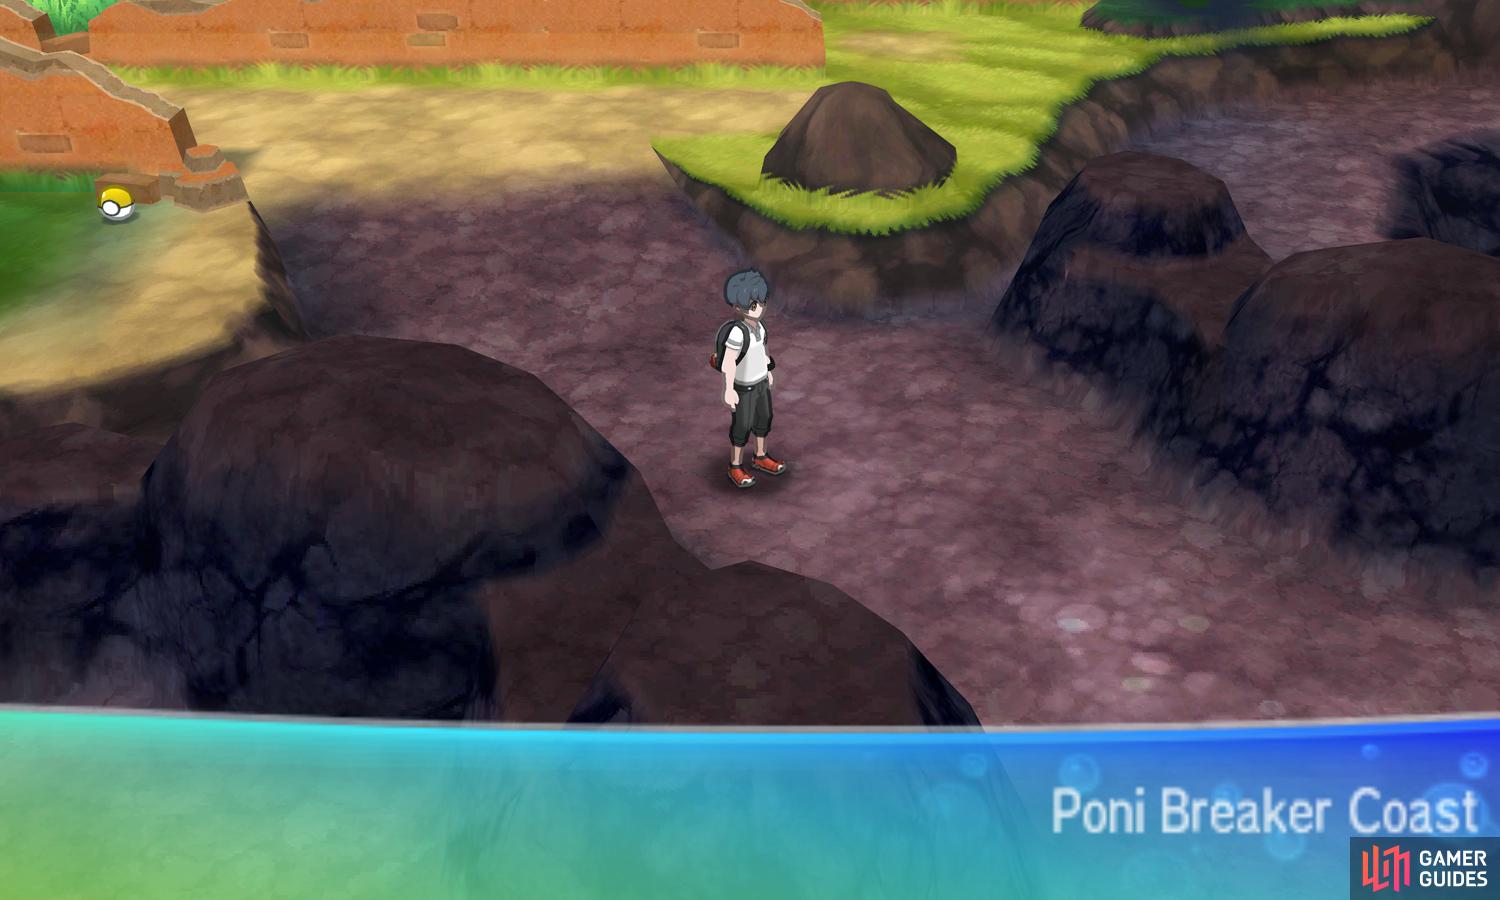 Not to be confused with the postgame area called "Poni Coast".